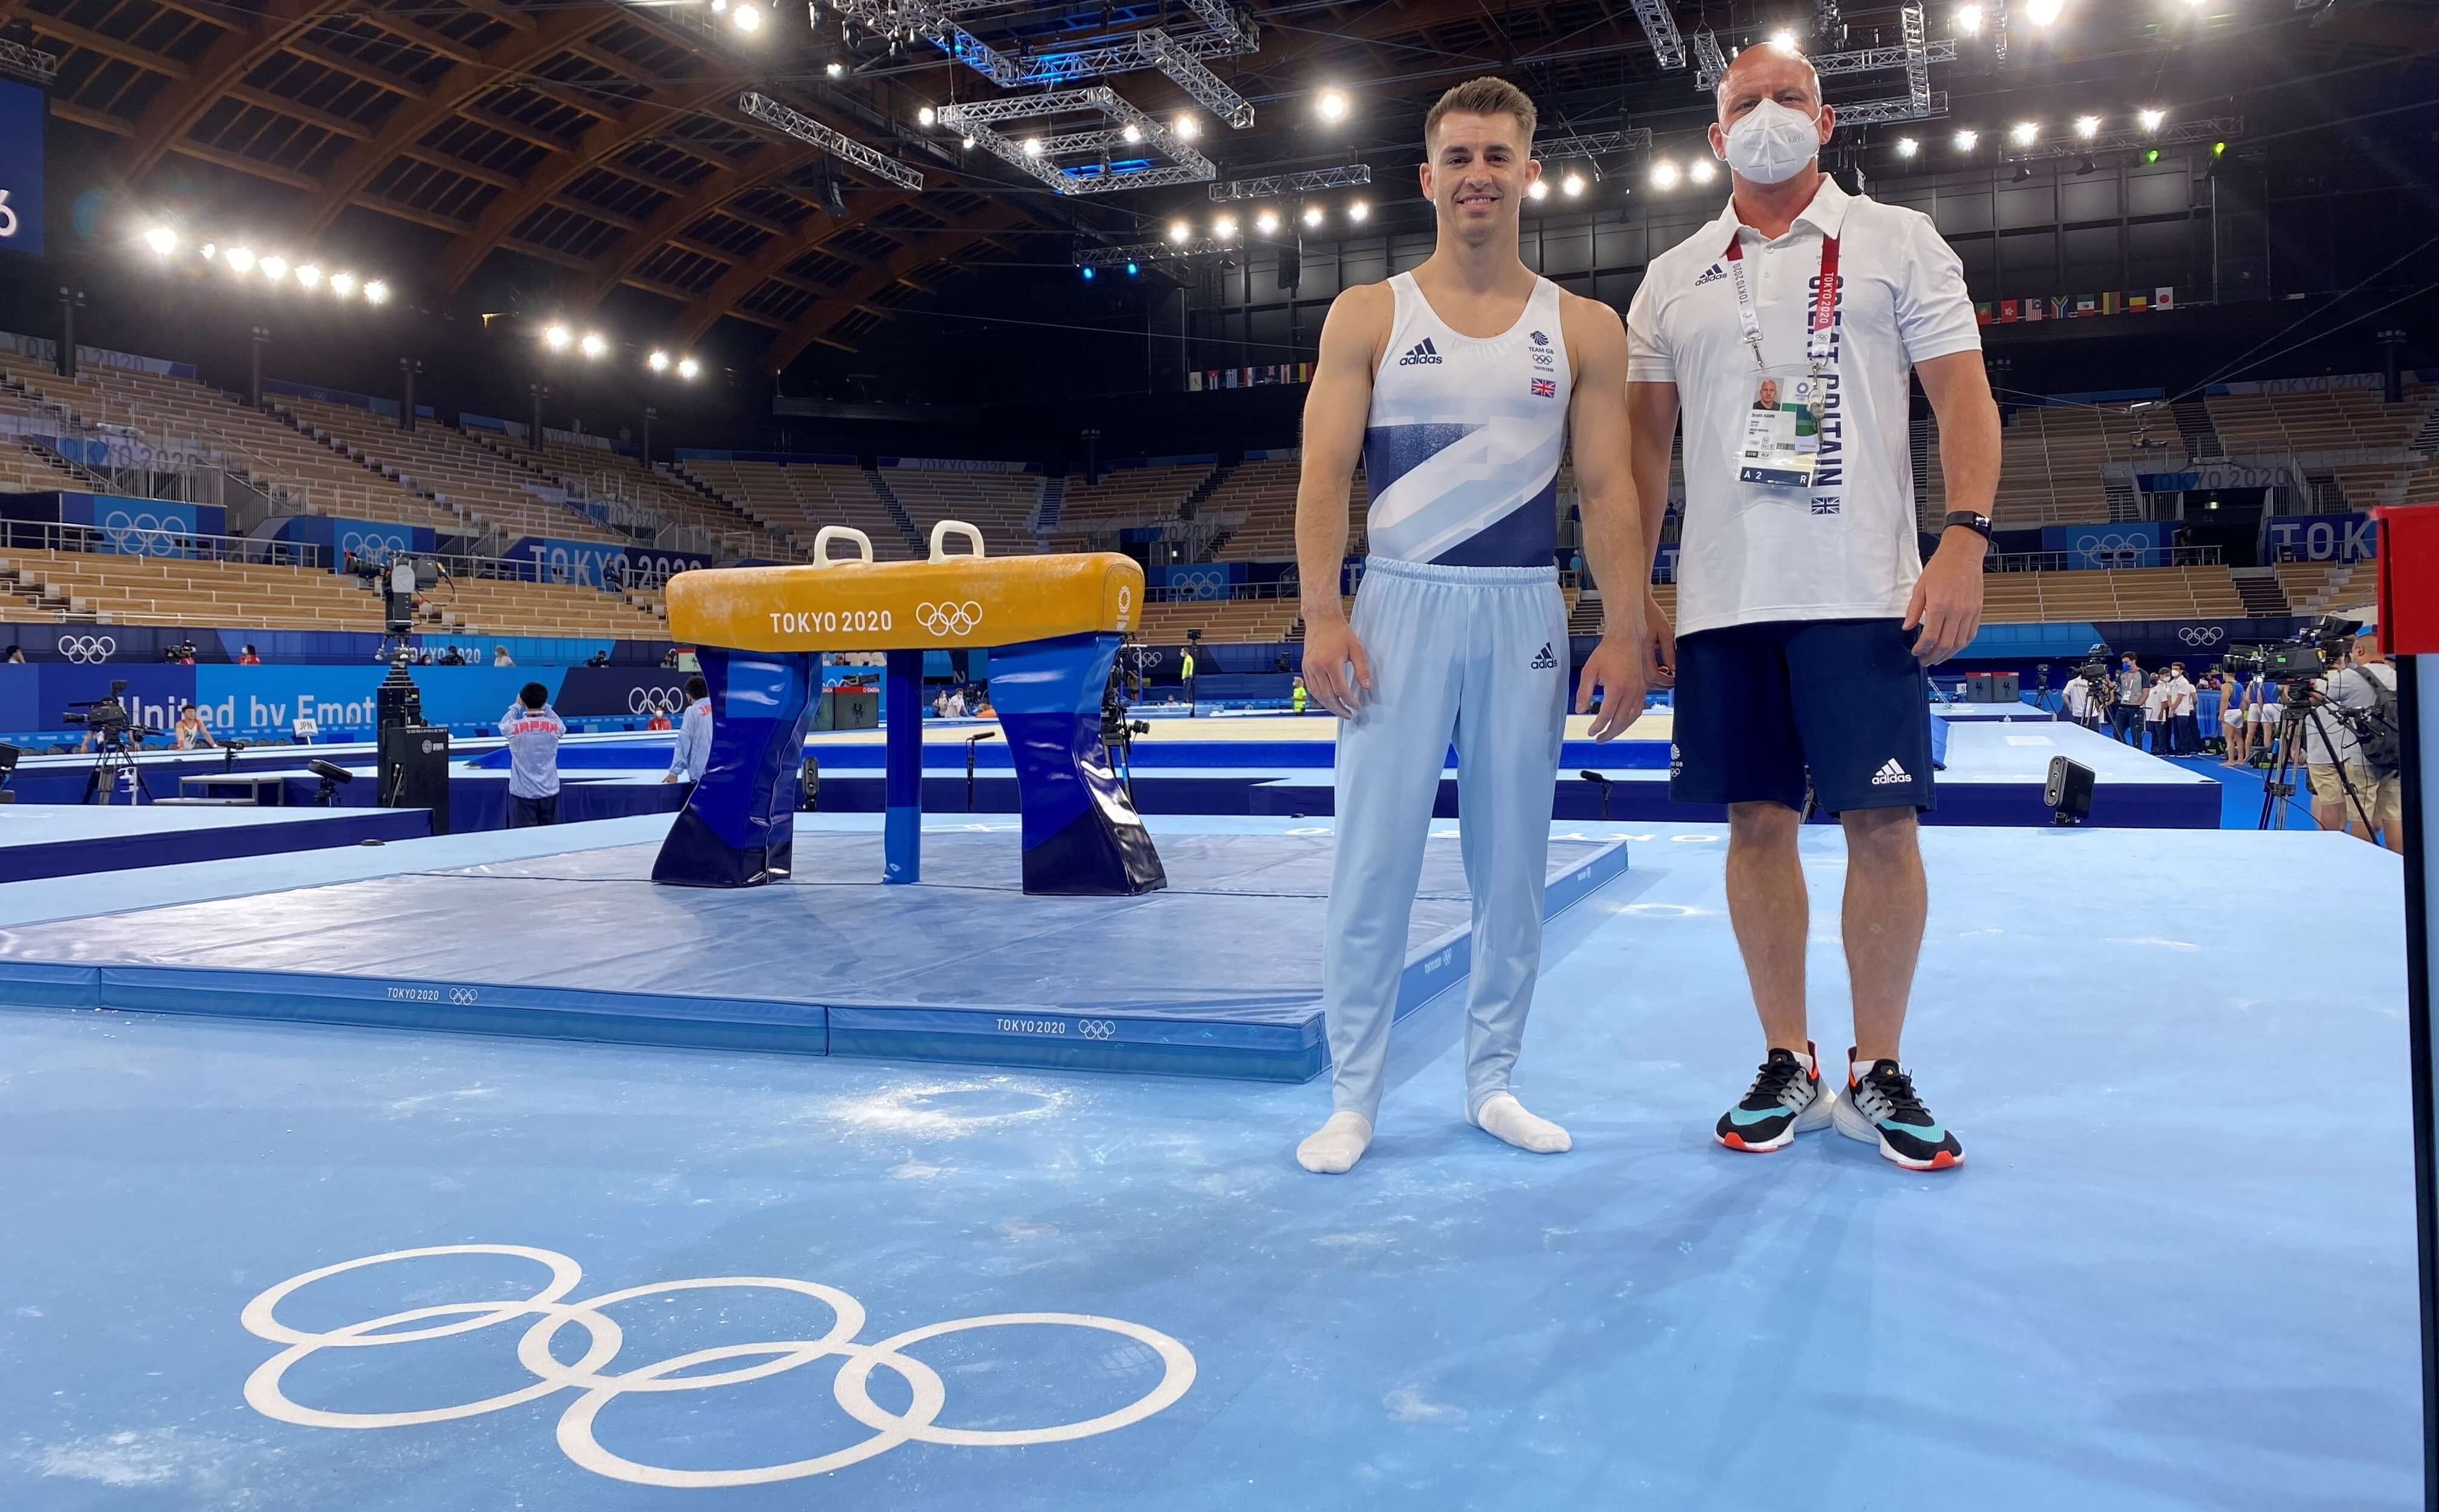 Coach and gymnast pose for a photo in front of the pommel horse apparatus inside the Olympic Games gymnastics venue